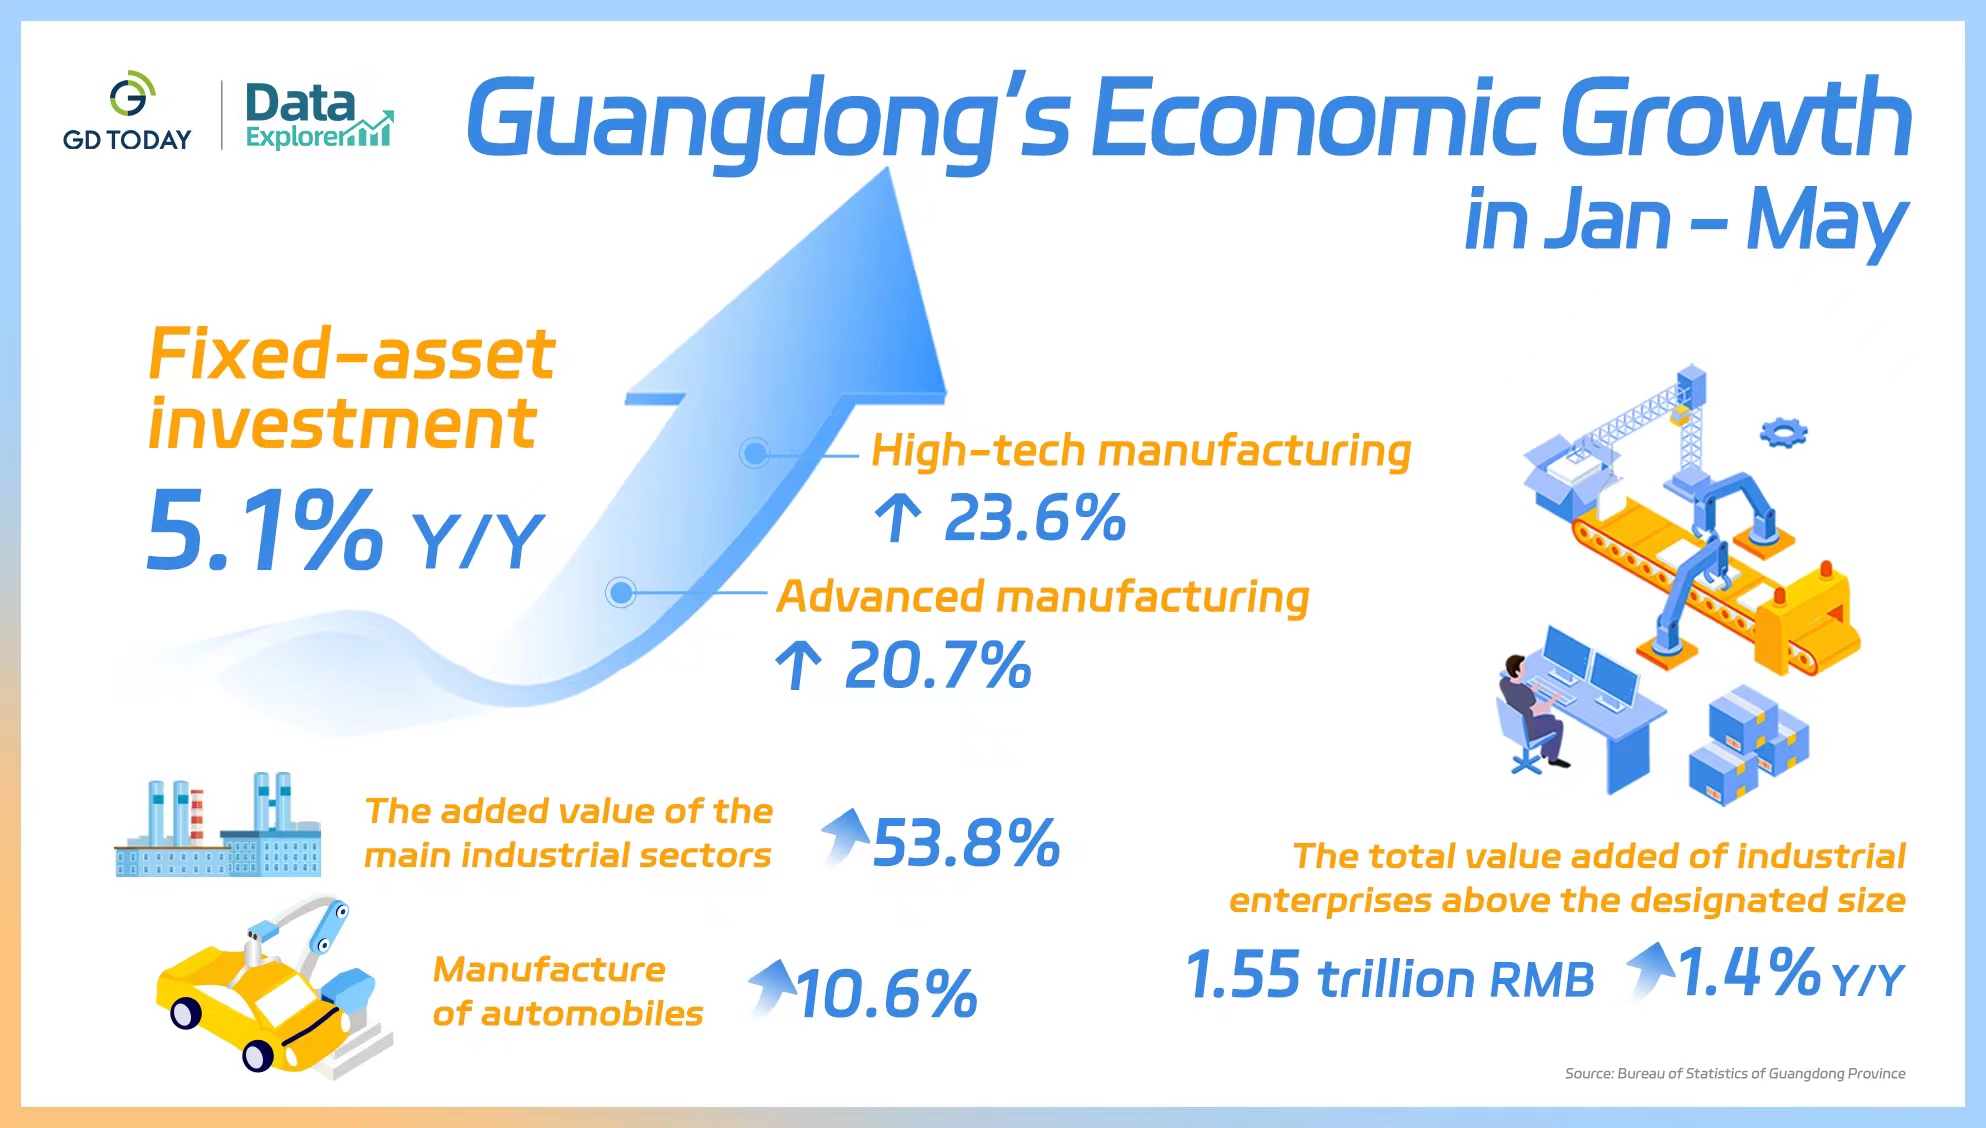 Guangdong’s investment in manufacturing sector posts double-digit growth in Jan - May